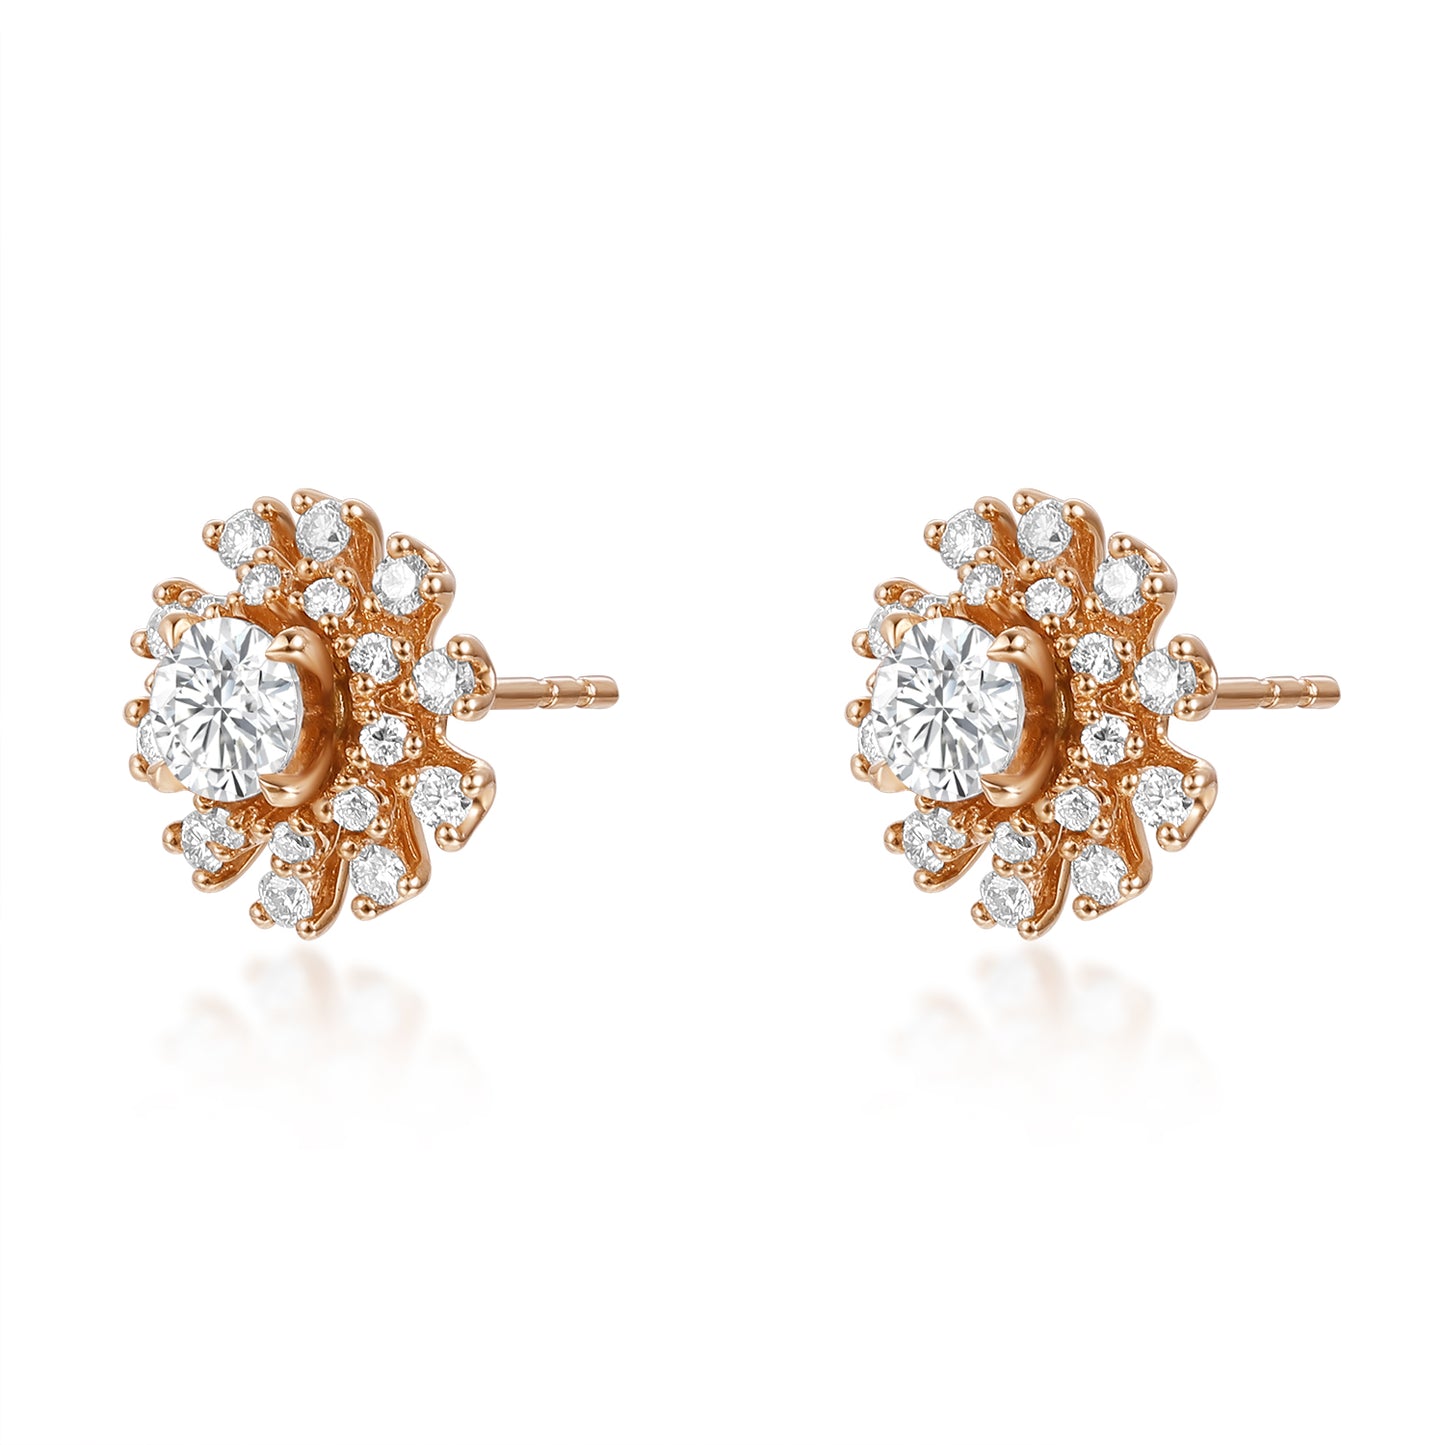 Minimalist Floral Layered Earrings 1.67 CT TW 18k Rose Gold